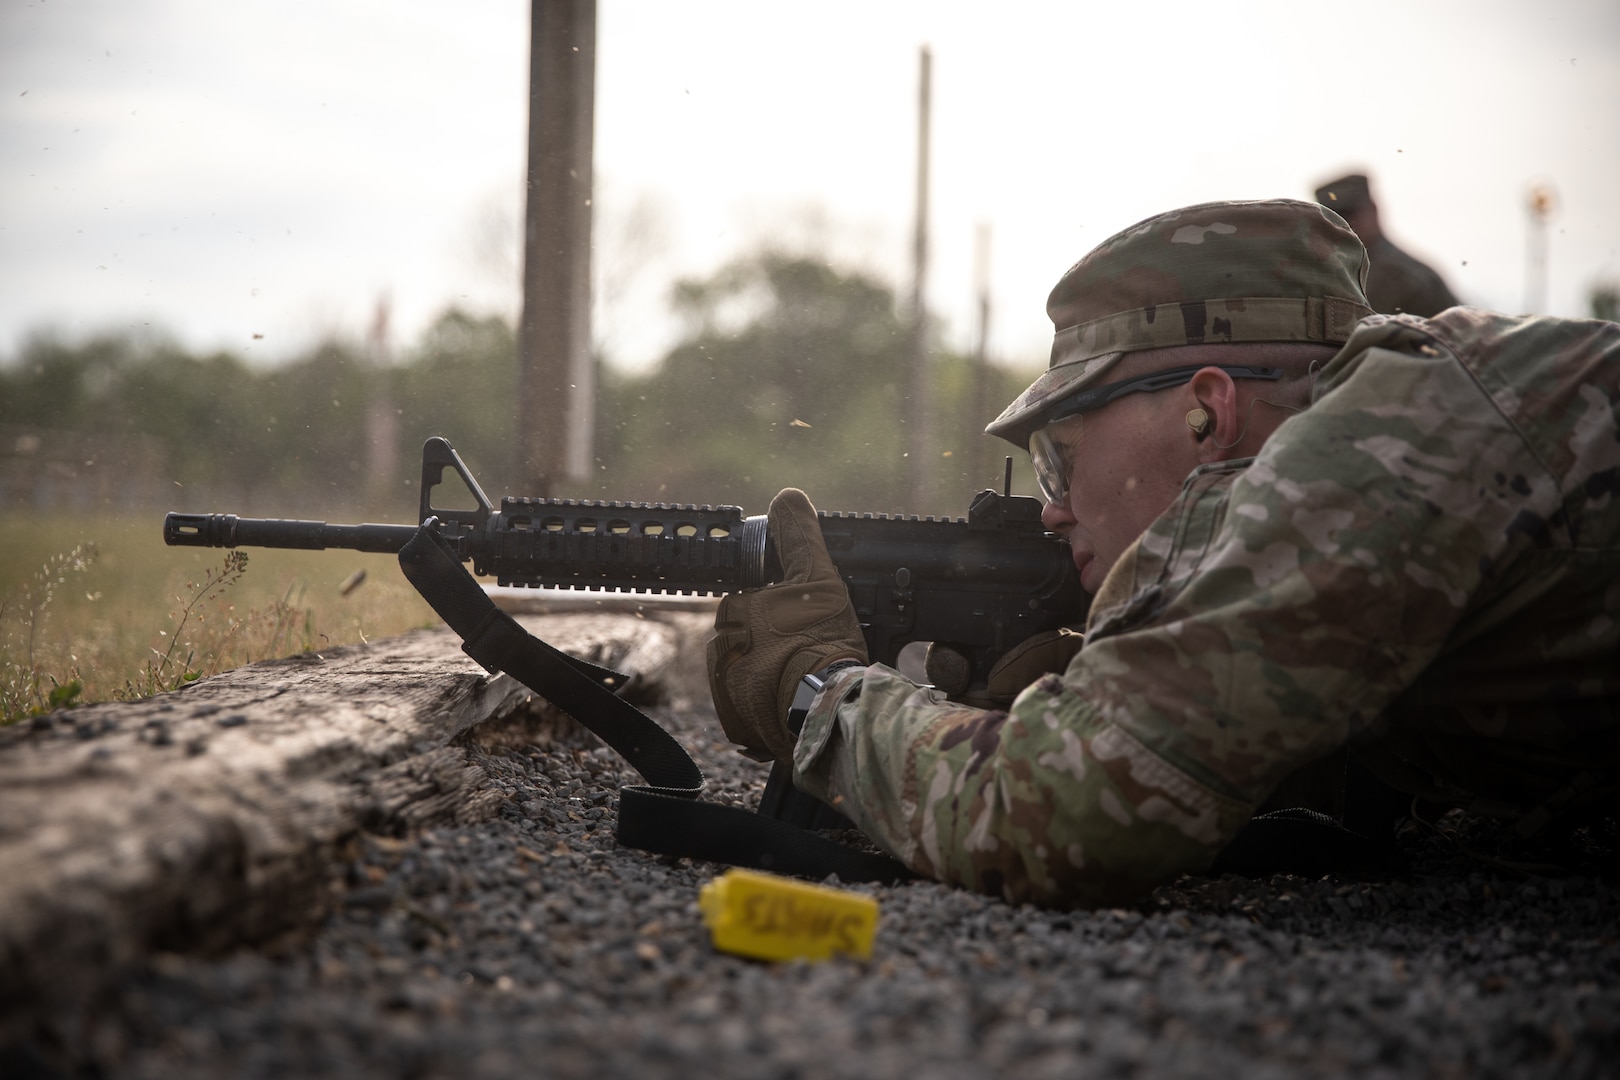 Spc. James Clark, a fire control specialist assigned to 1st Battalion, 160th Field Artillery Regiment, shoots an M4 carbine in a marksmanship challenge during the Best Warrior Competition at Camp Gruber Training Center, Oklahoma, April 22, 2023. The annual competition brings Soldiers together to demonstrate their proficiency in a variety of warrior tasks and drills such as land navigation, marksmanship, an obstacle course, and a 12-mile ruck march, all culminating in an interview with a panel of sergeants major. (Oklahoma National Guard photo by Spc. Danielle Rayon)